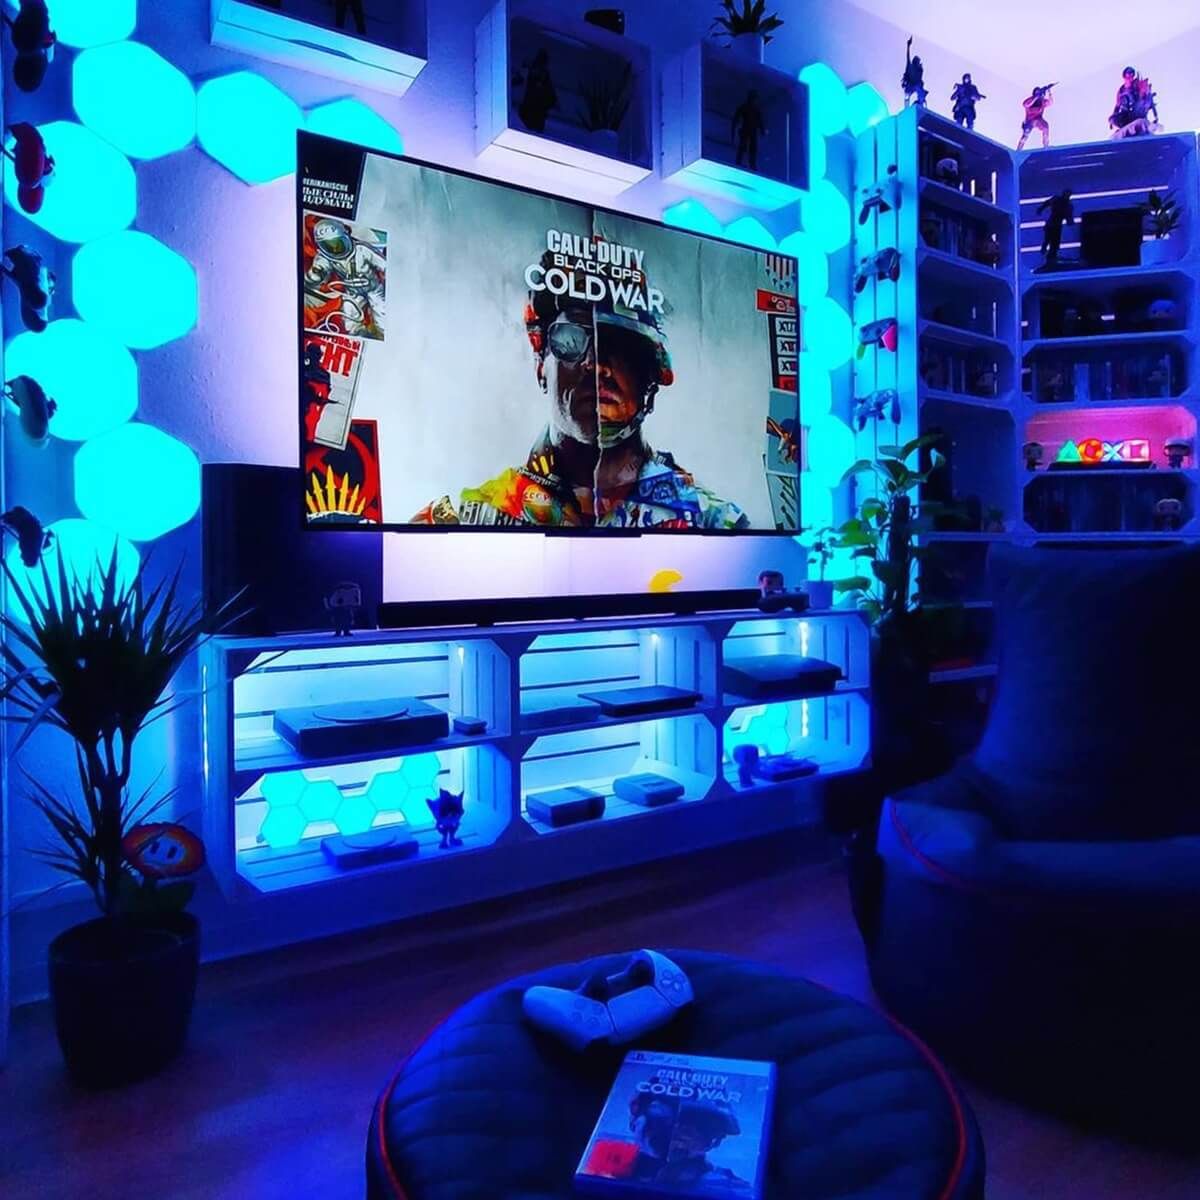 Best Gaming Entertainment Centers & Tv Stand Setup Ideas | Gridfiti Within Rgb Tv Entertainment Centers (View 5 of 20)